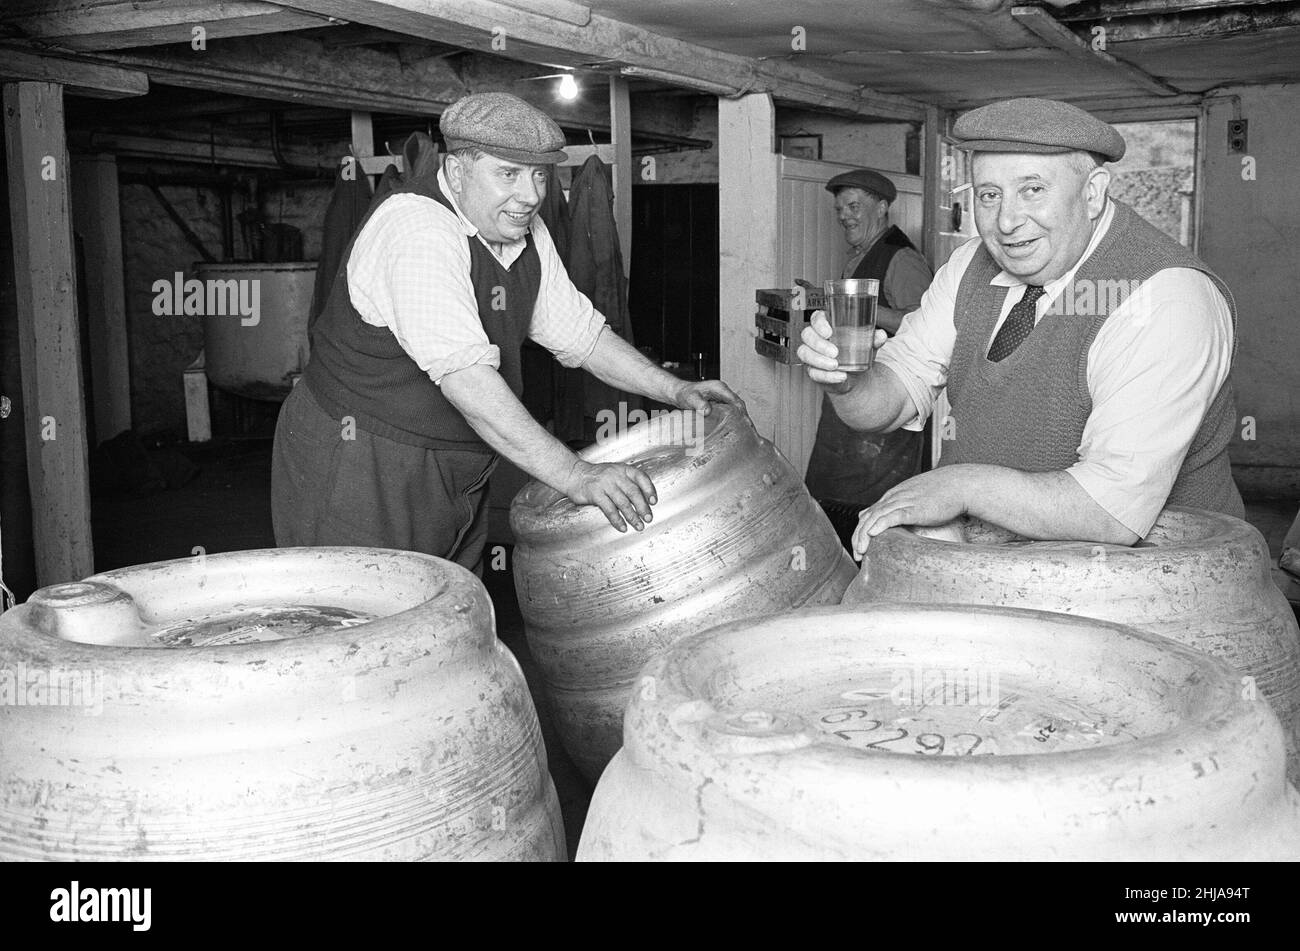 a-drayman-samples-the-beer-during-a-break-in-work-at-the-donnington-brewery-5th-july-1963-2HJA...jpg